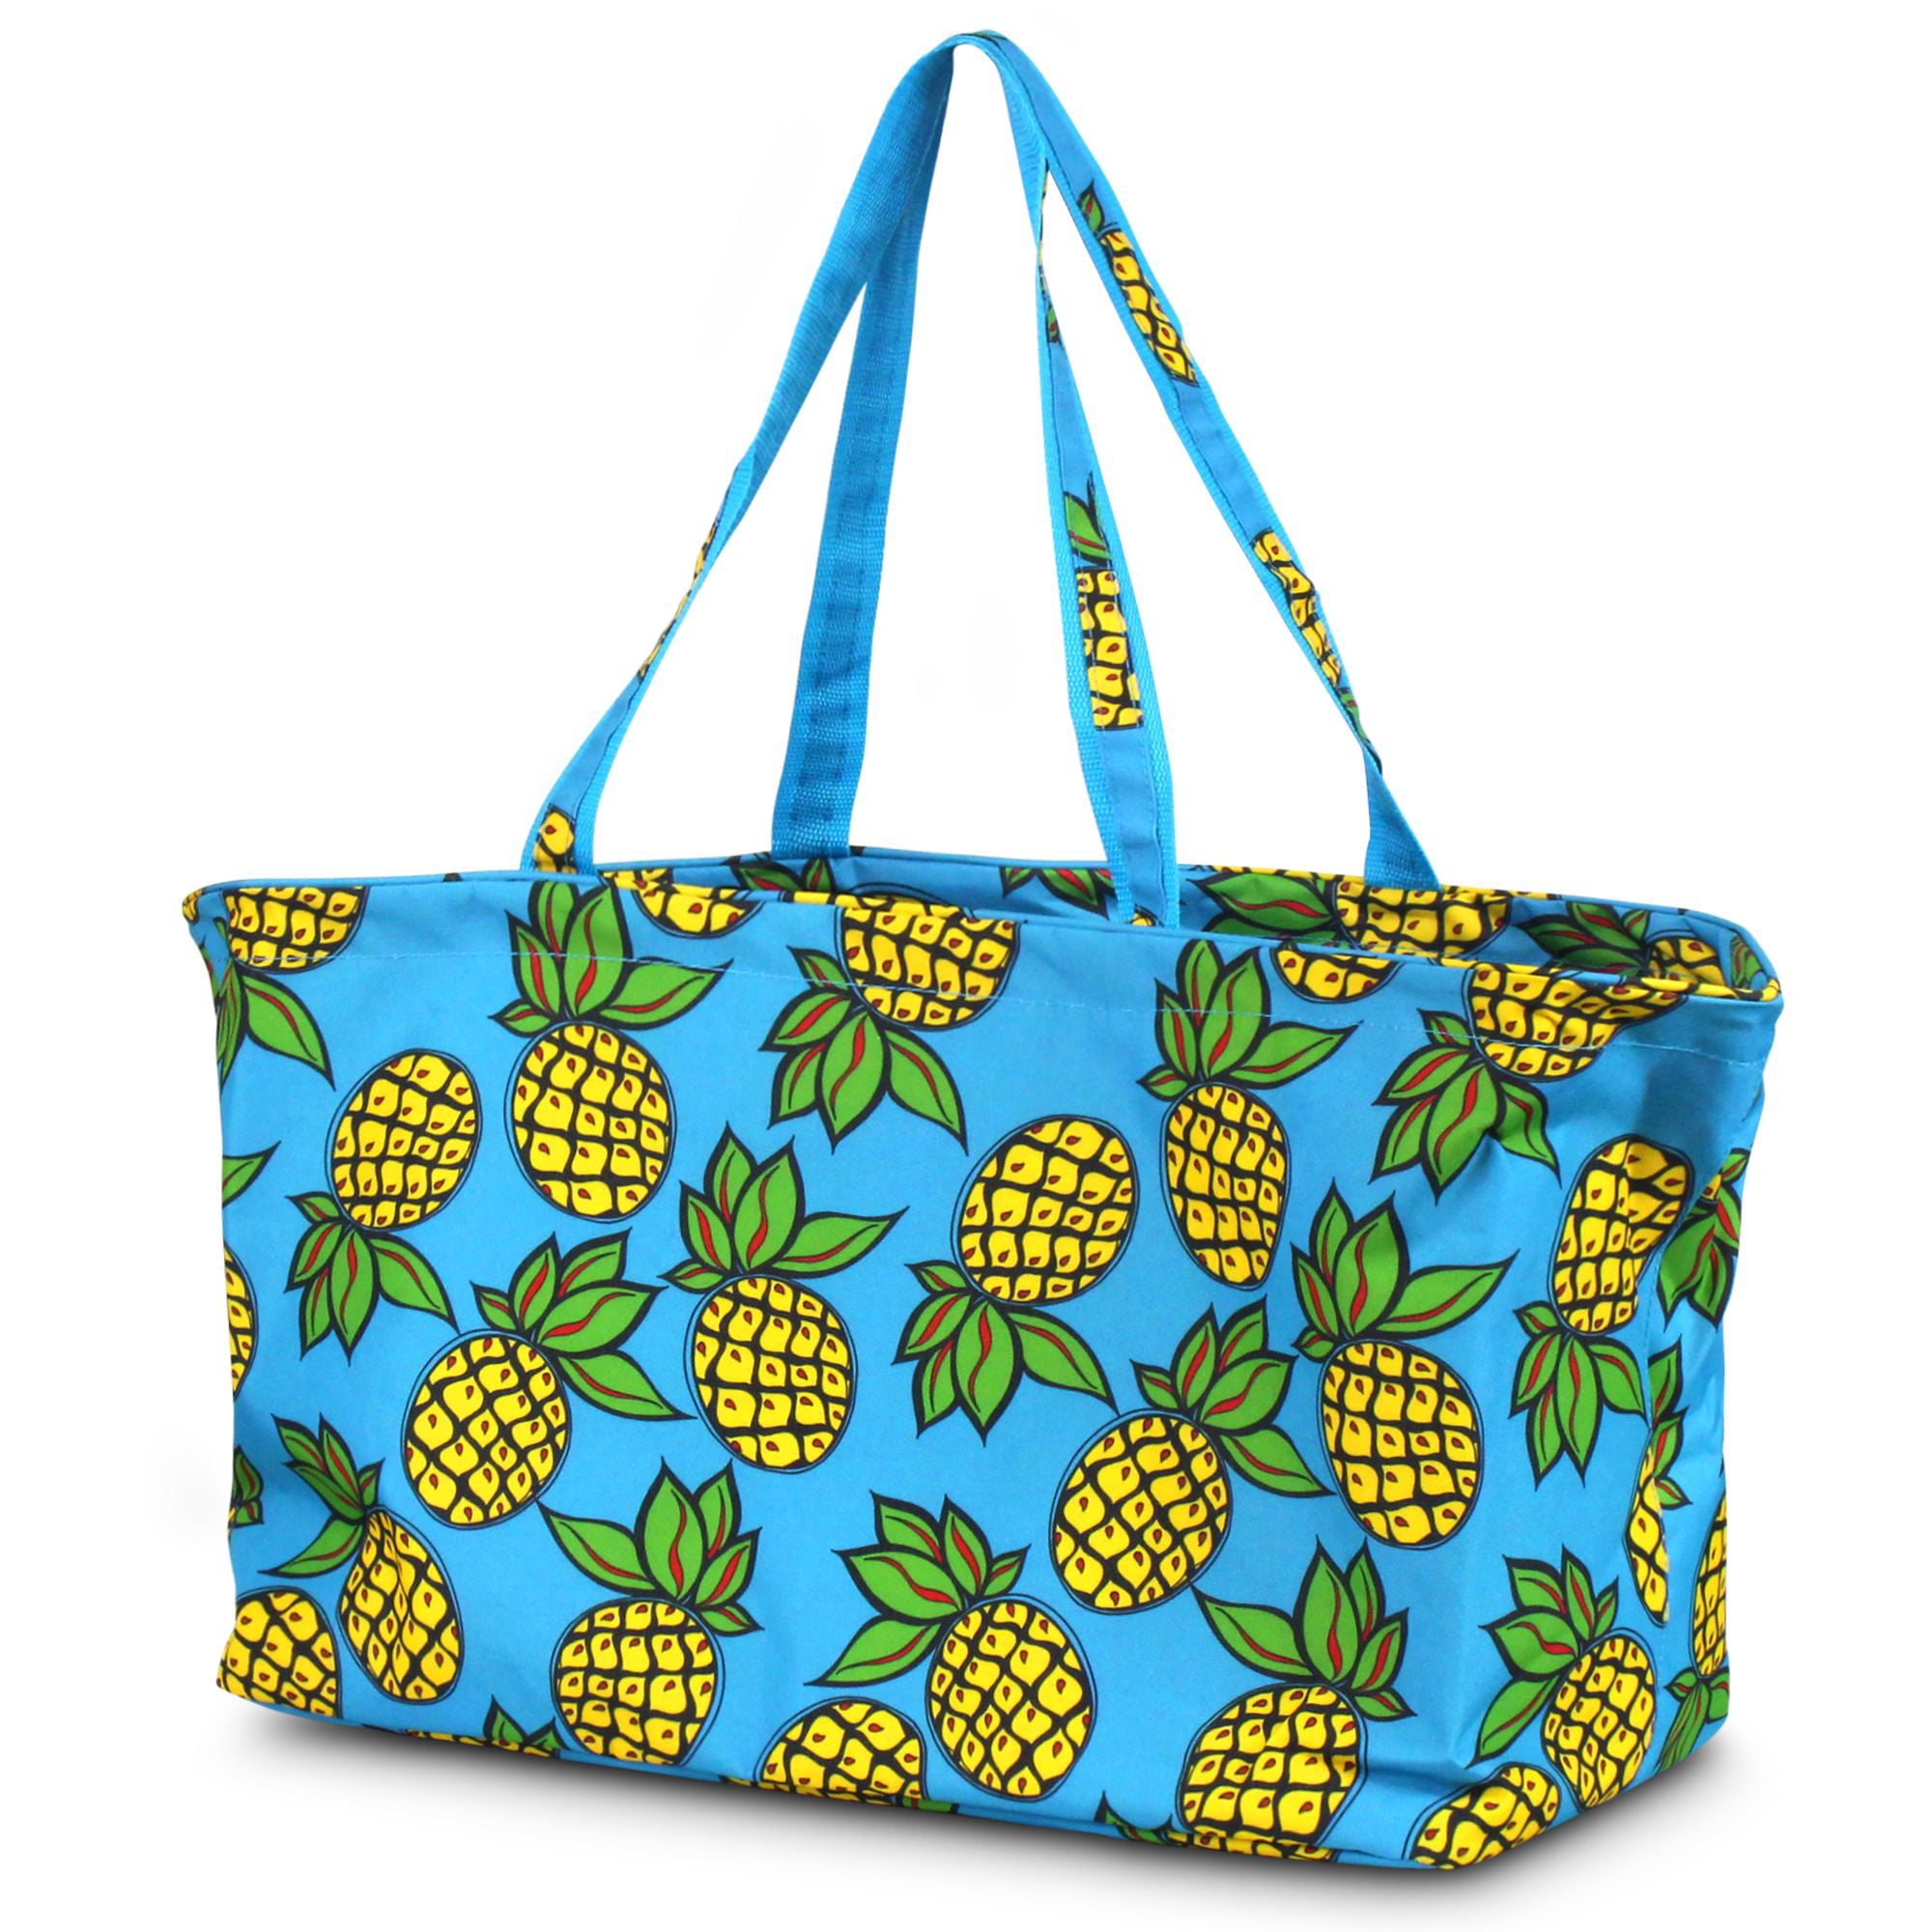 Laptop Bag Briefcase Shoulder Bag Pineapples 15.6 Inch Tote Bag Laptop Messenger Shoulder Bag Laptop Carrying Bag Great to Casual